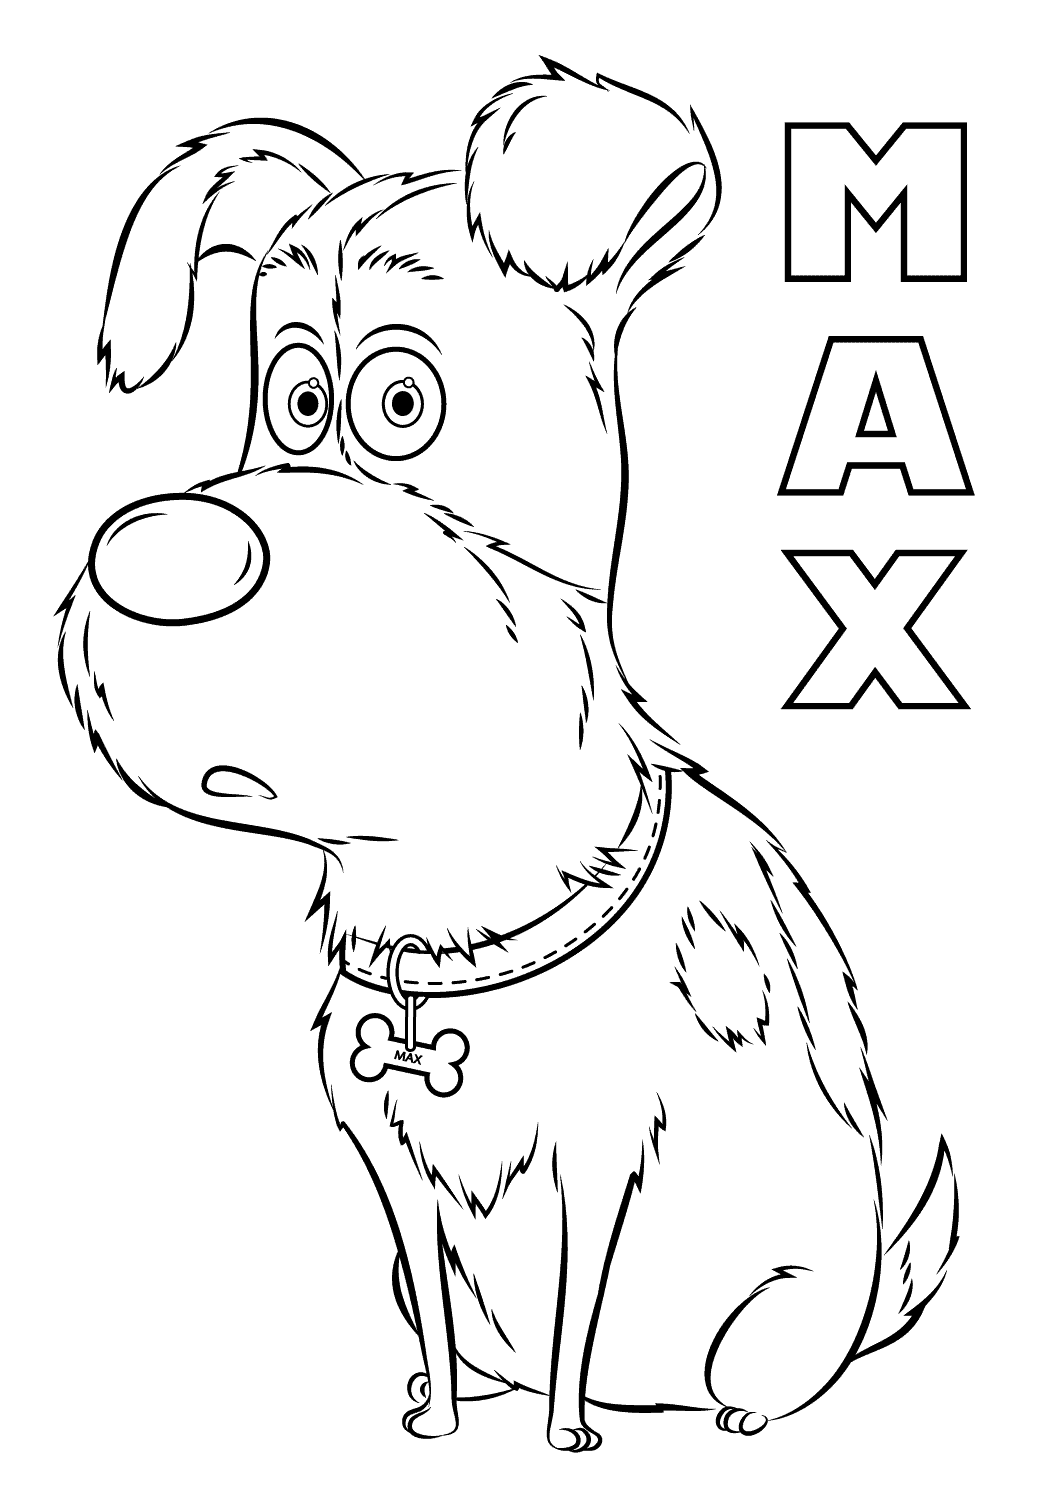 The Secret Life of Pets coloring page to print and color